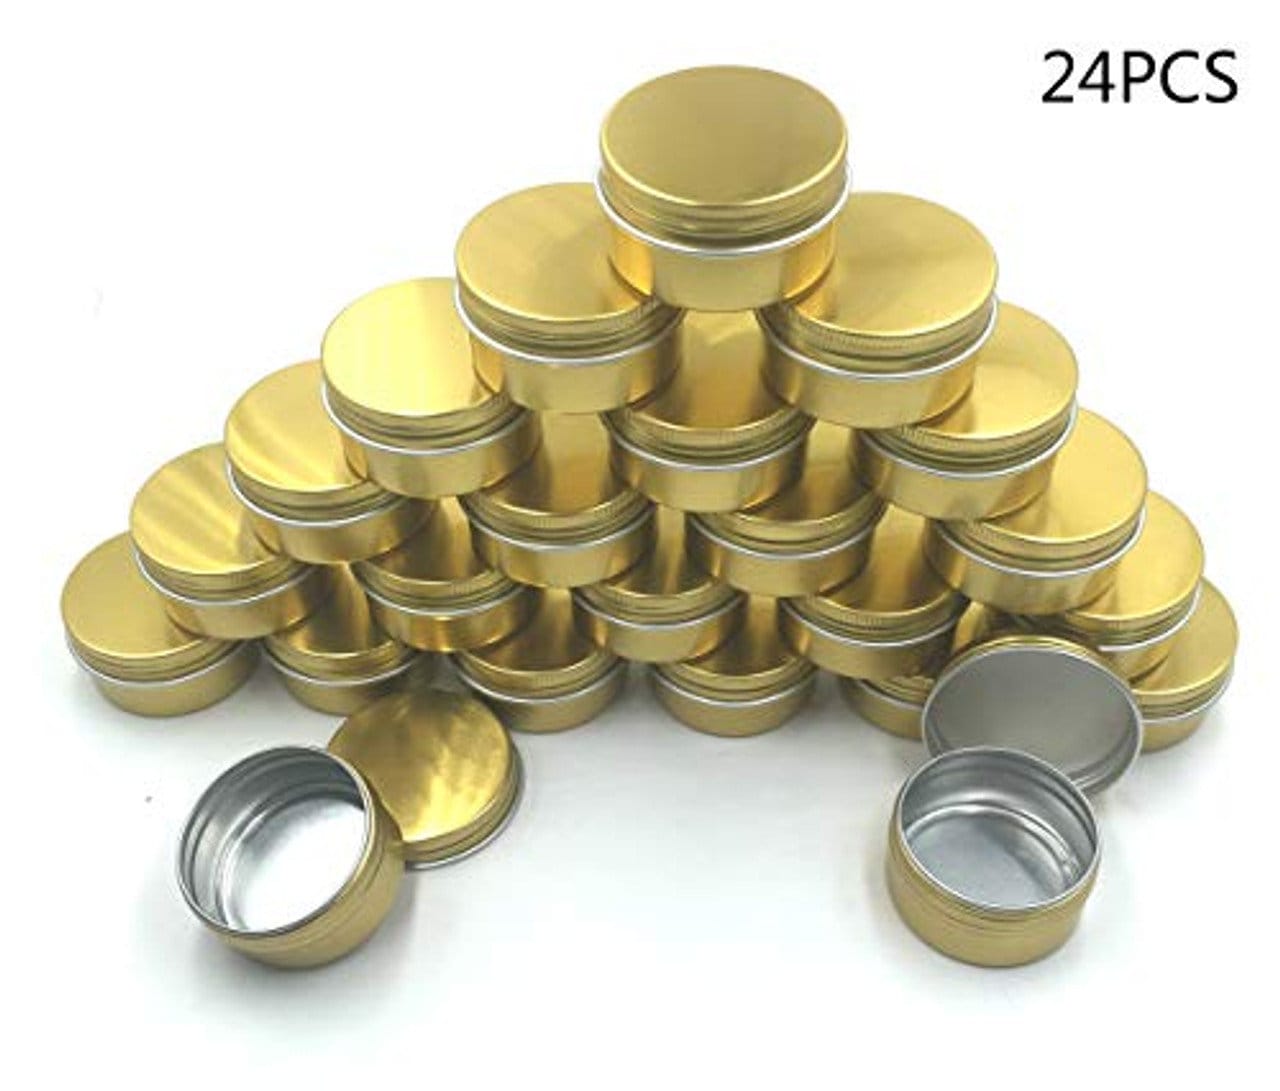 Christmas Sale! 1.7oz Screw Top Lid Round Aluminum Cans Tin Containers  Multicolor 10 Pack 